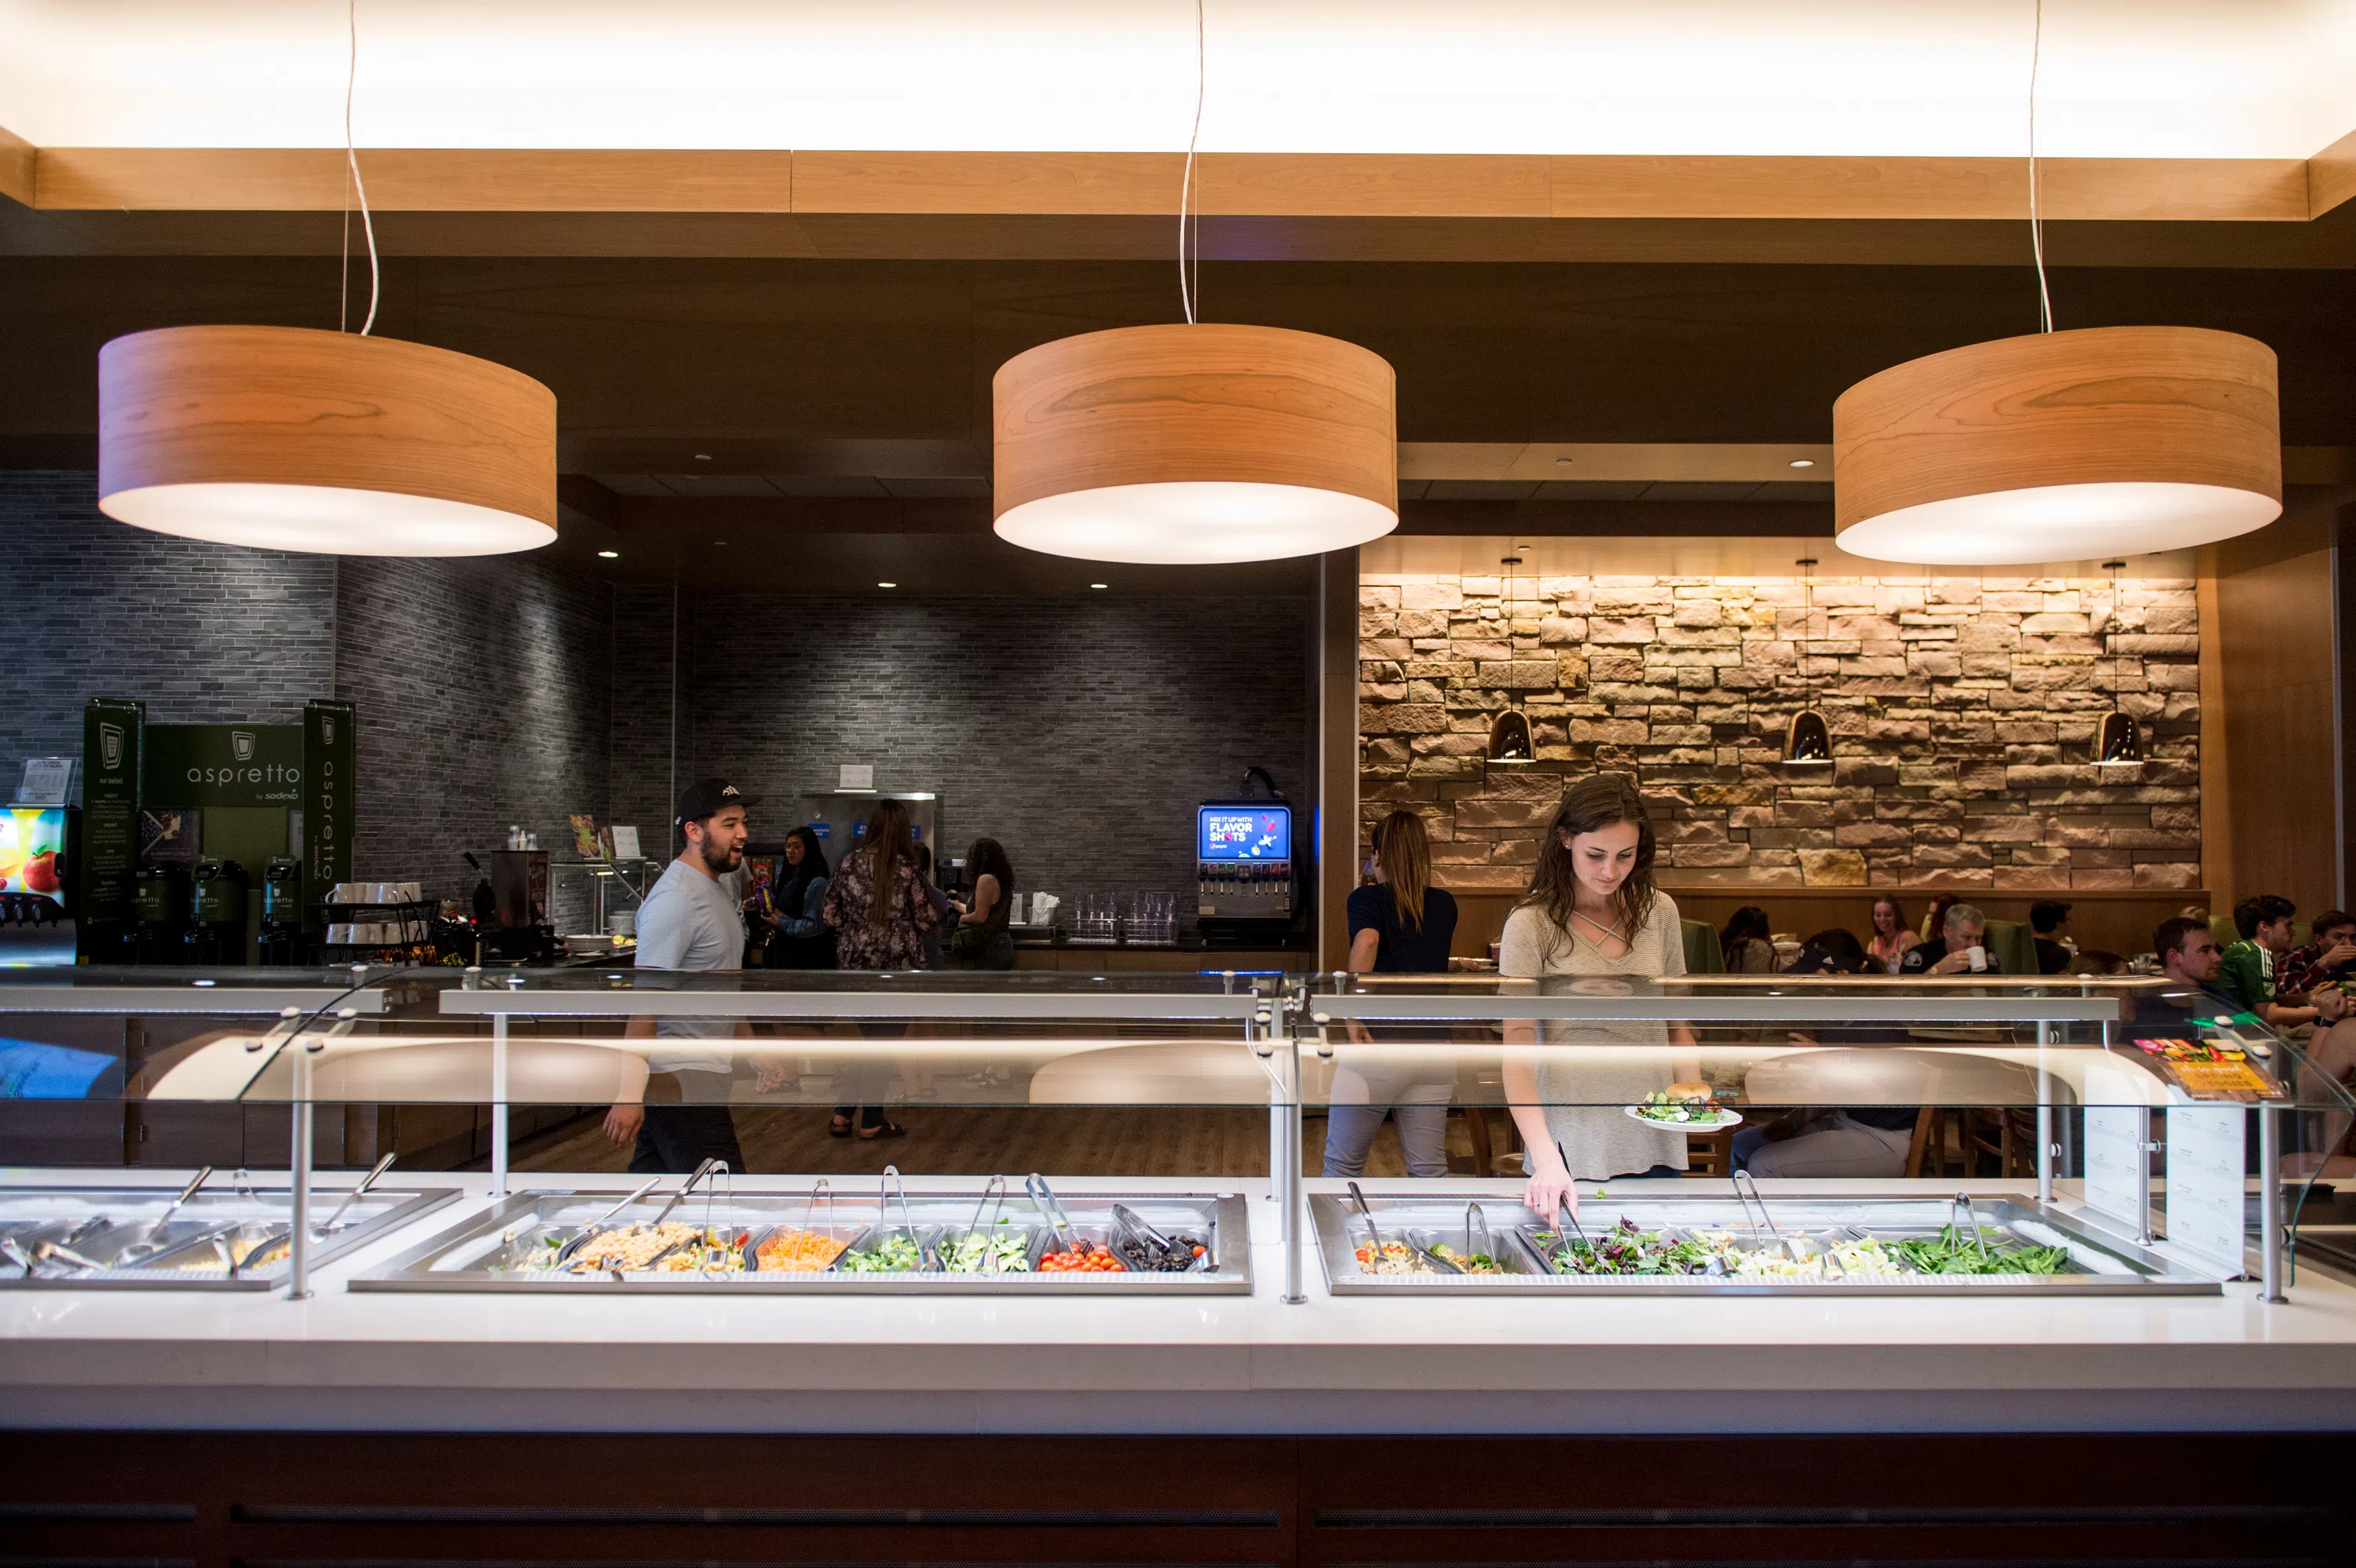 Salad Bar with large lighting above and one girl in line